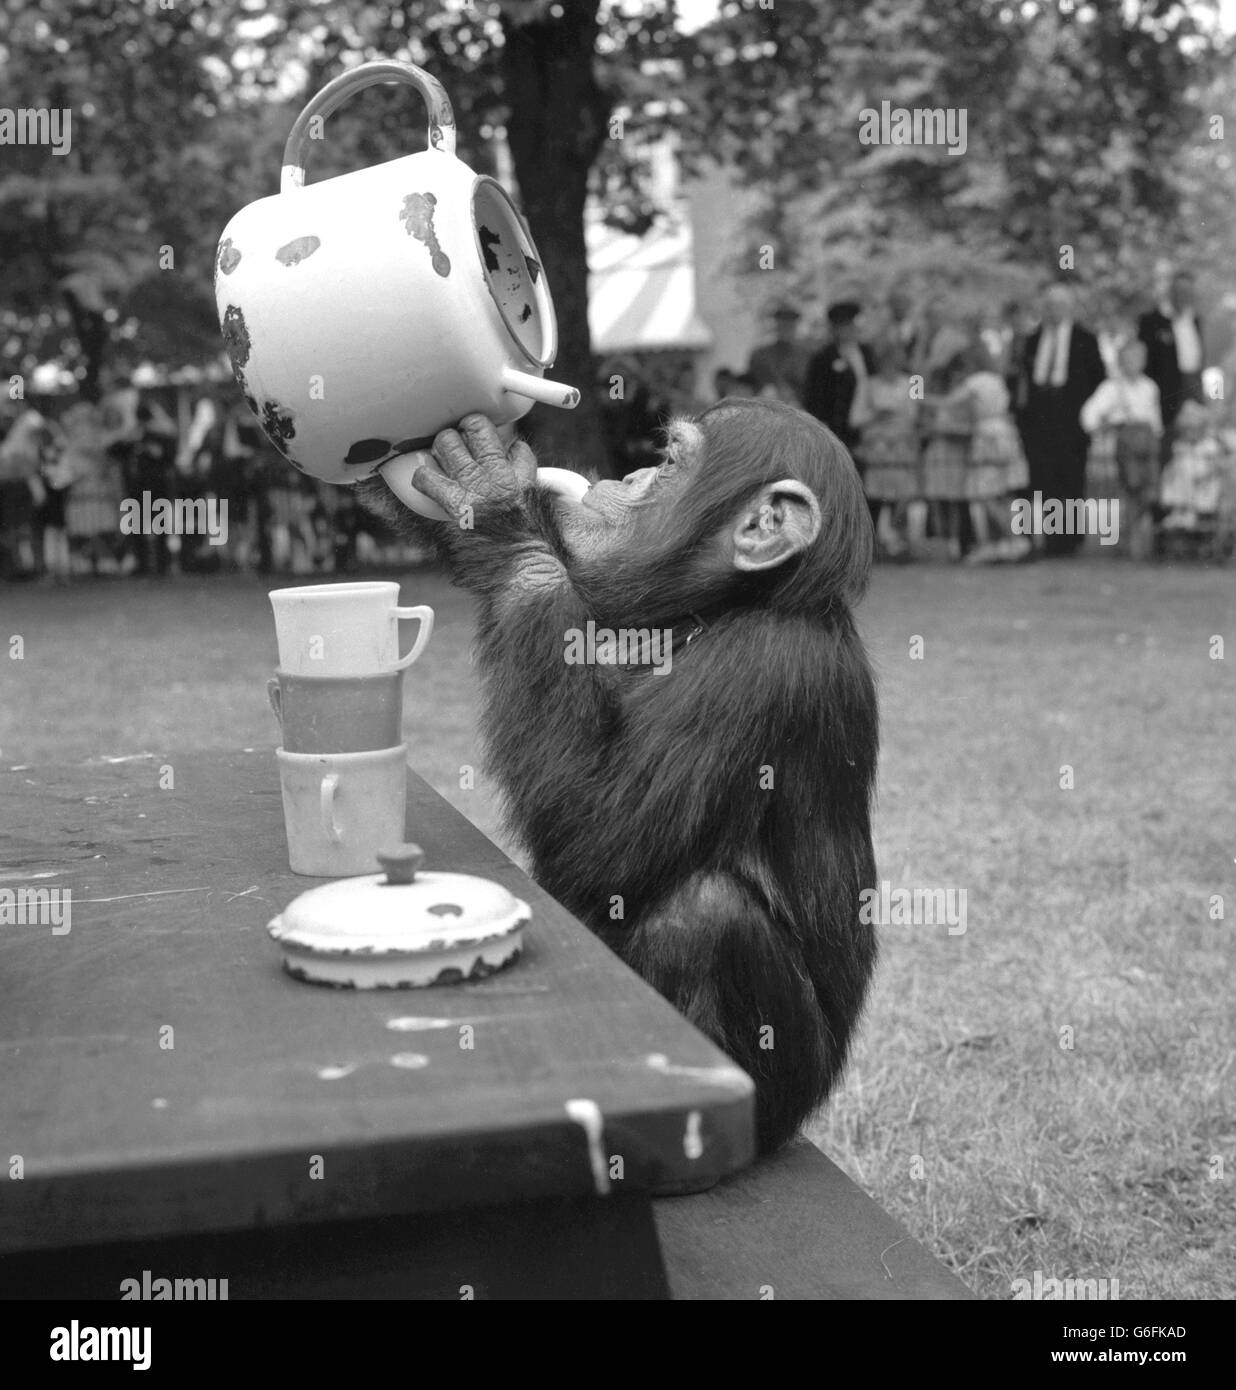 Taking a drink direct from the pot's spout - a trick she will learn to forget as her manners improve - four-year-old chimpanzee Josie on the main lawn at London Zoo in Regent's Park for the popular chimpanzees' tea party. Stock Photo